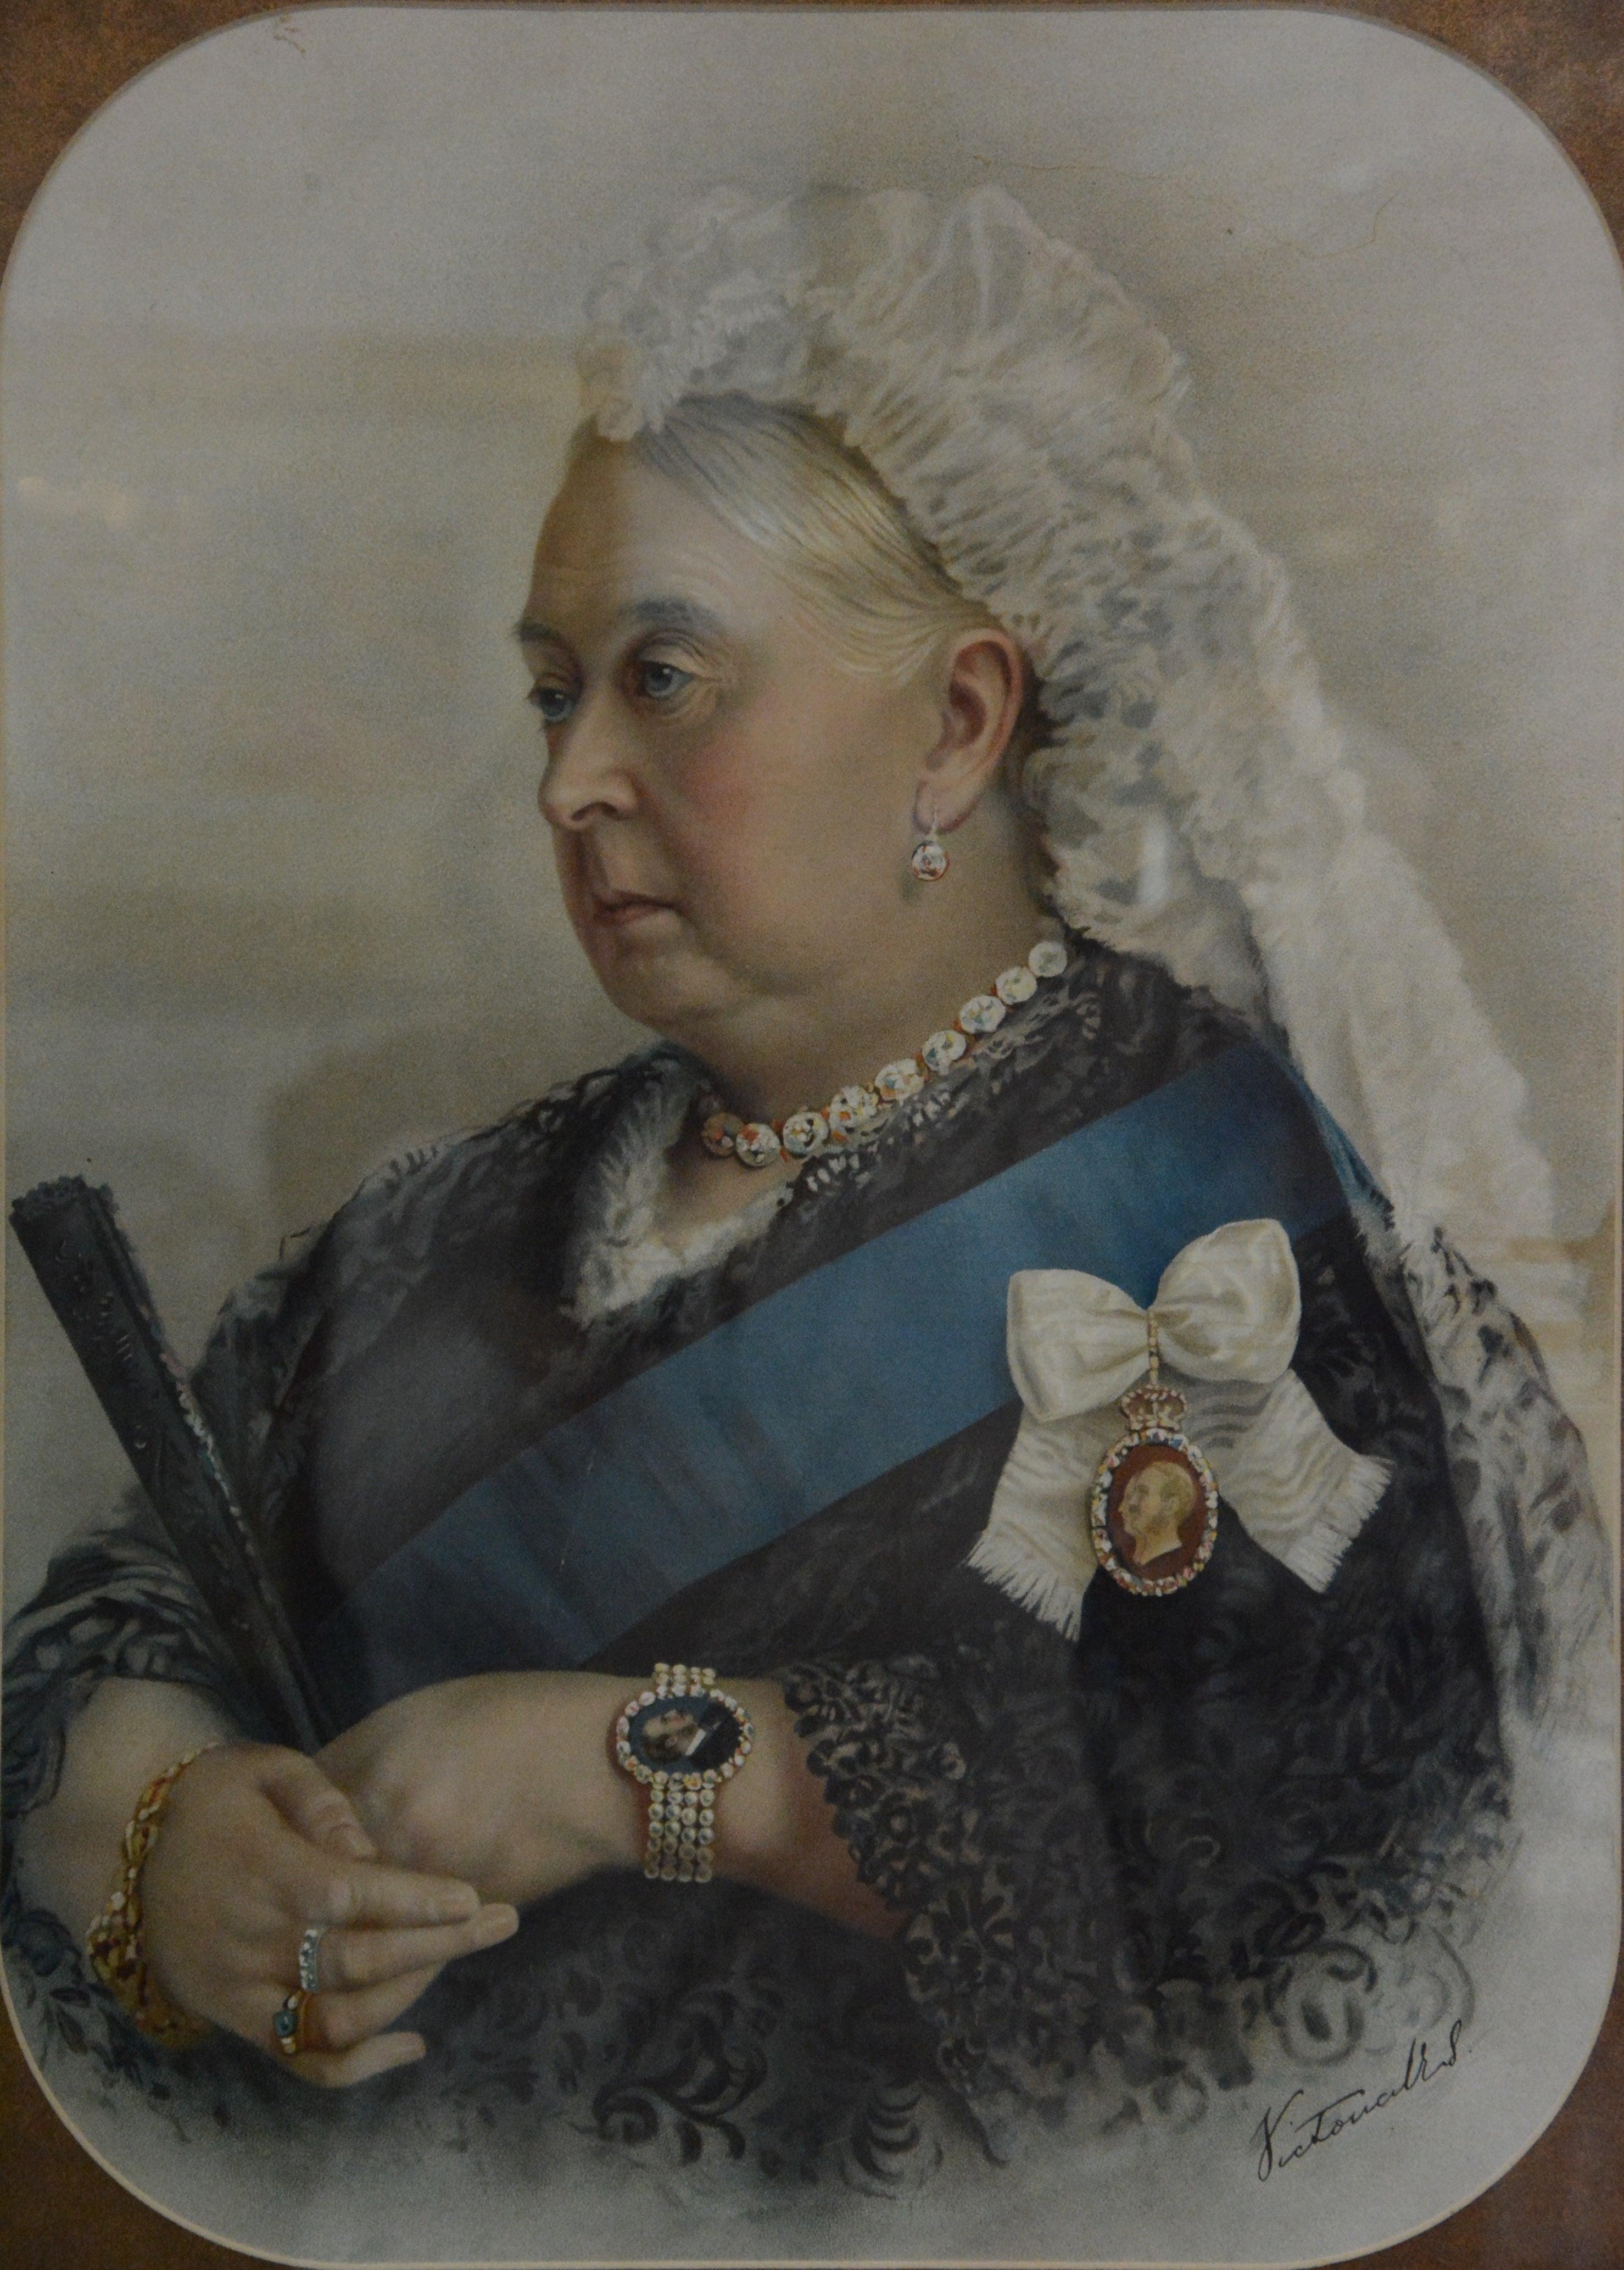 Up for your consideration is a beautiful image of Queen Victoria with a white veil, diamond necklace and pearl bracelet along with her blue sash. The lithograph is matted and framed in an ornate gilt frame. It is covered in glazed glass. The actual